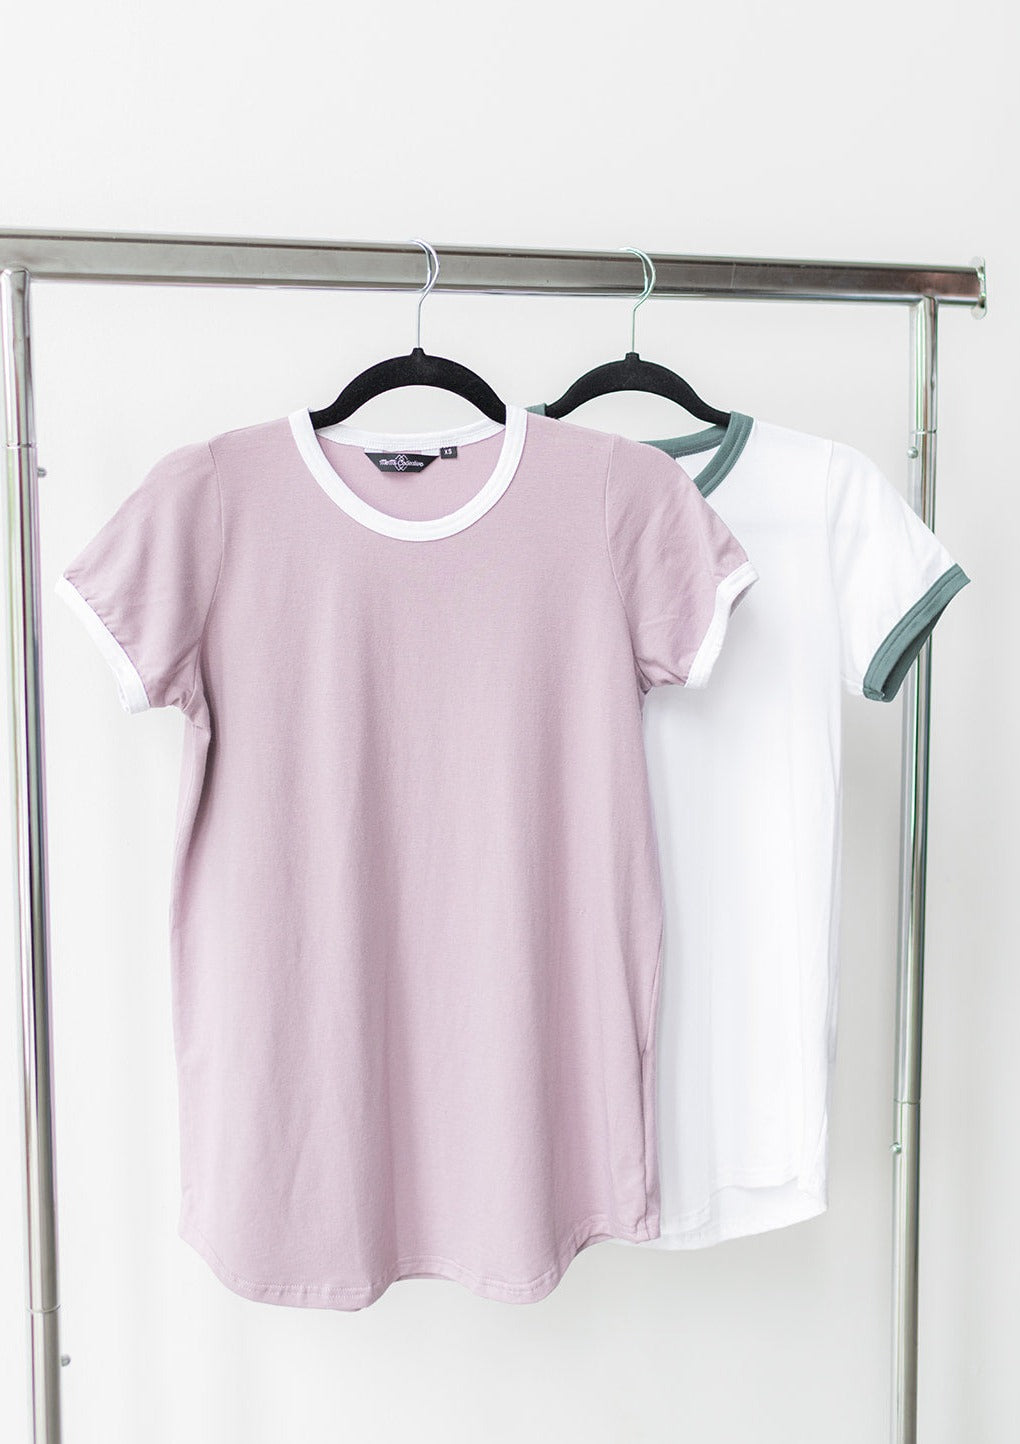 The Perfect Ringer Tee in White/Palm